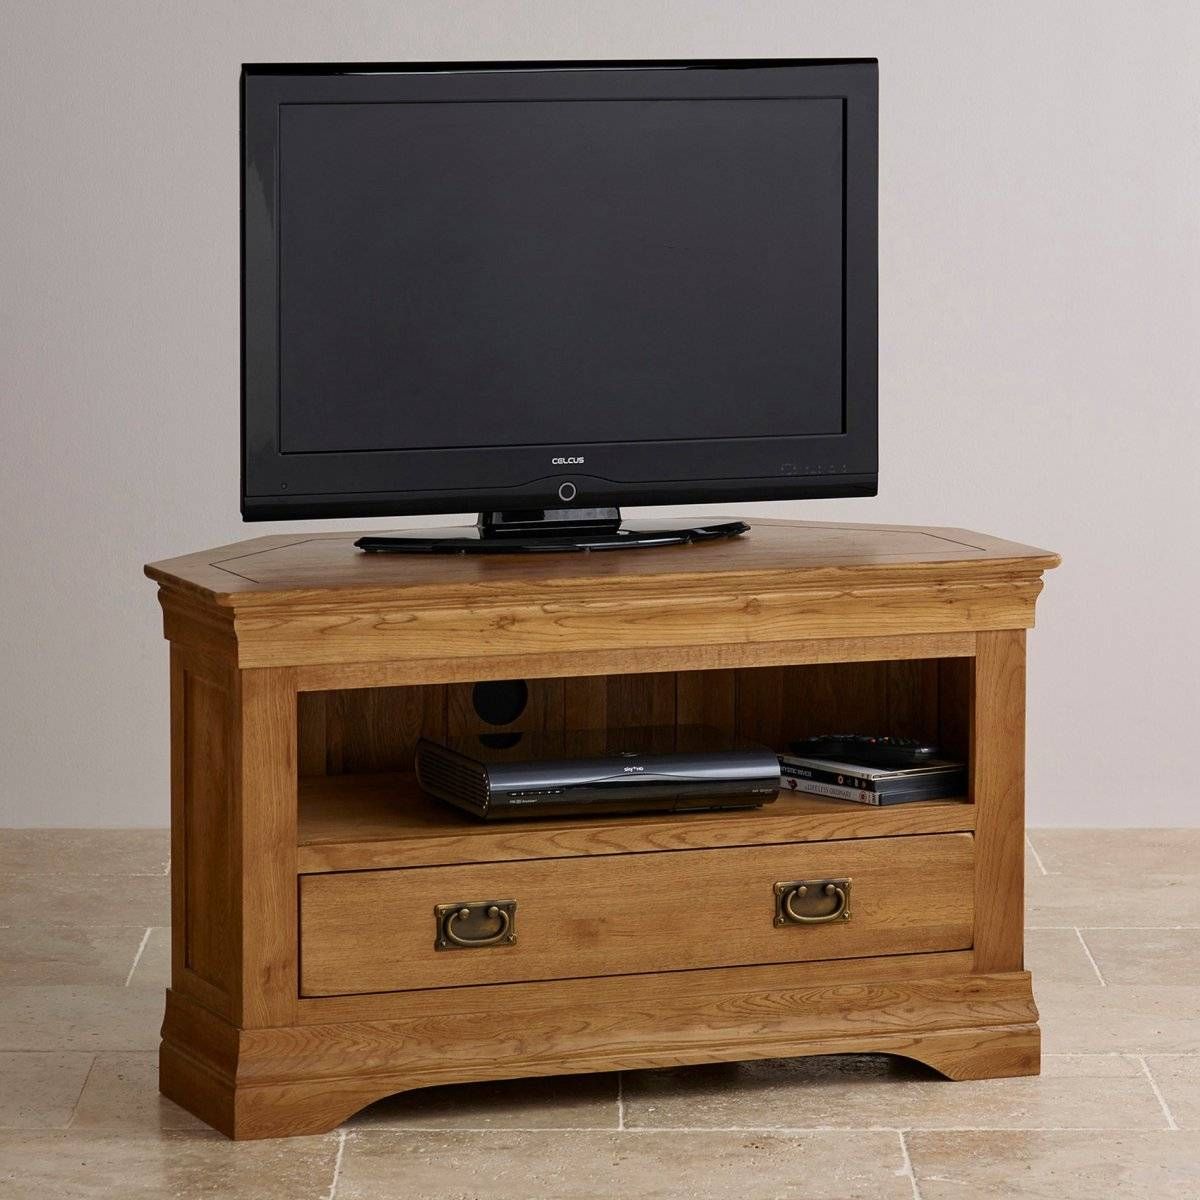 French Farmhouse Corner Tv Unit | Solid Oak | Oak Furniture Land With Regard To Real Wood Corner Tv Stands (View 3 of 15)